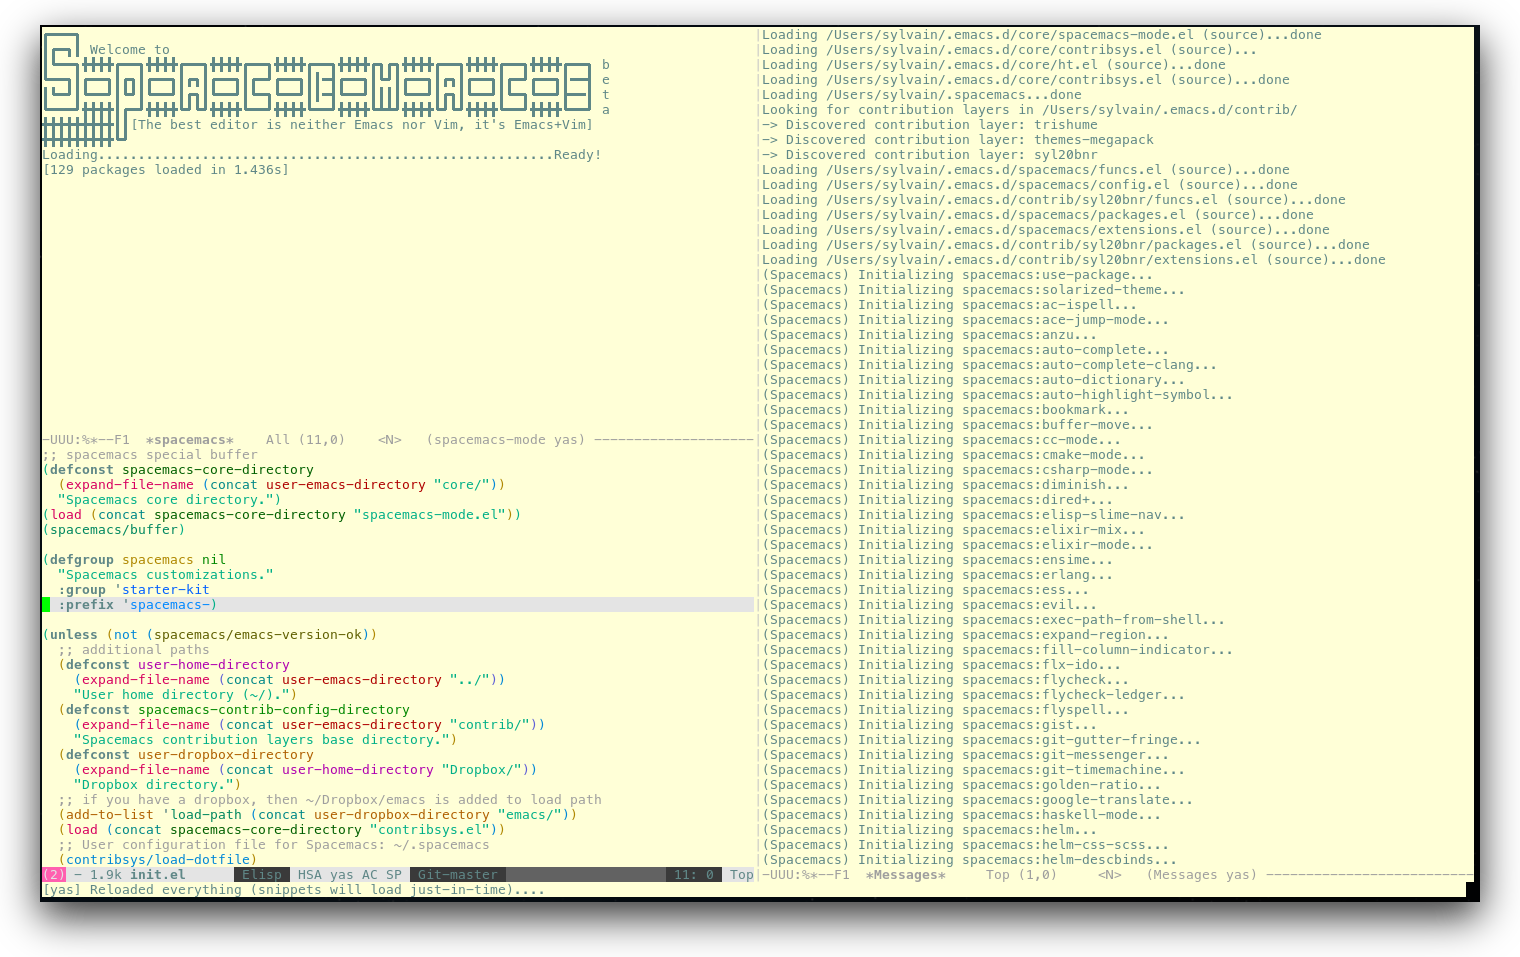 /TakeV/spacemacs/media/commit/d17c229c2ac22c045638902fb0ee63b31c0c4233/doc/img/spacemacs-urxvt.png